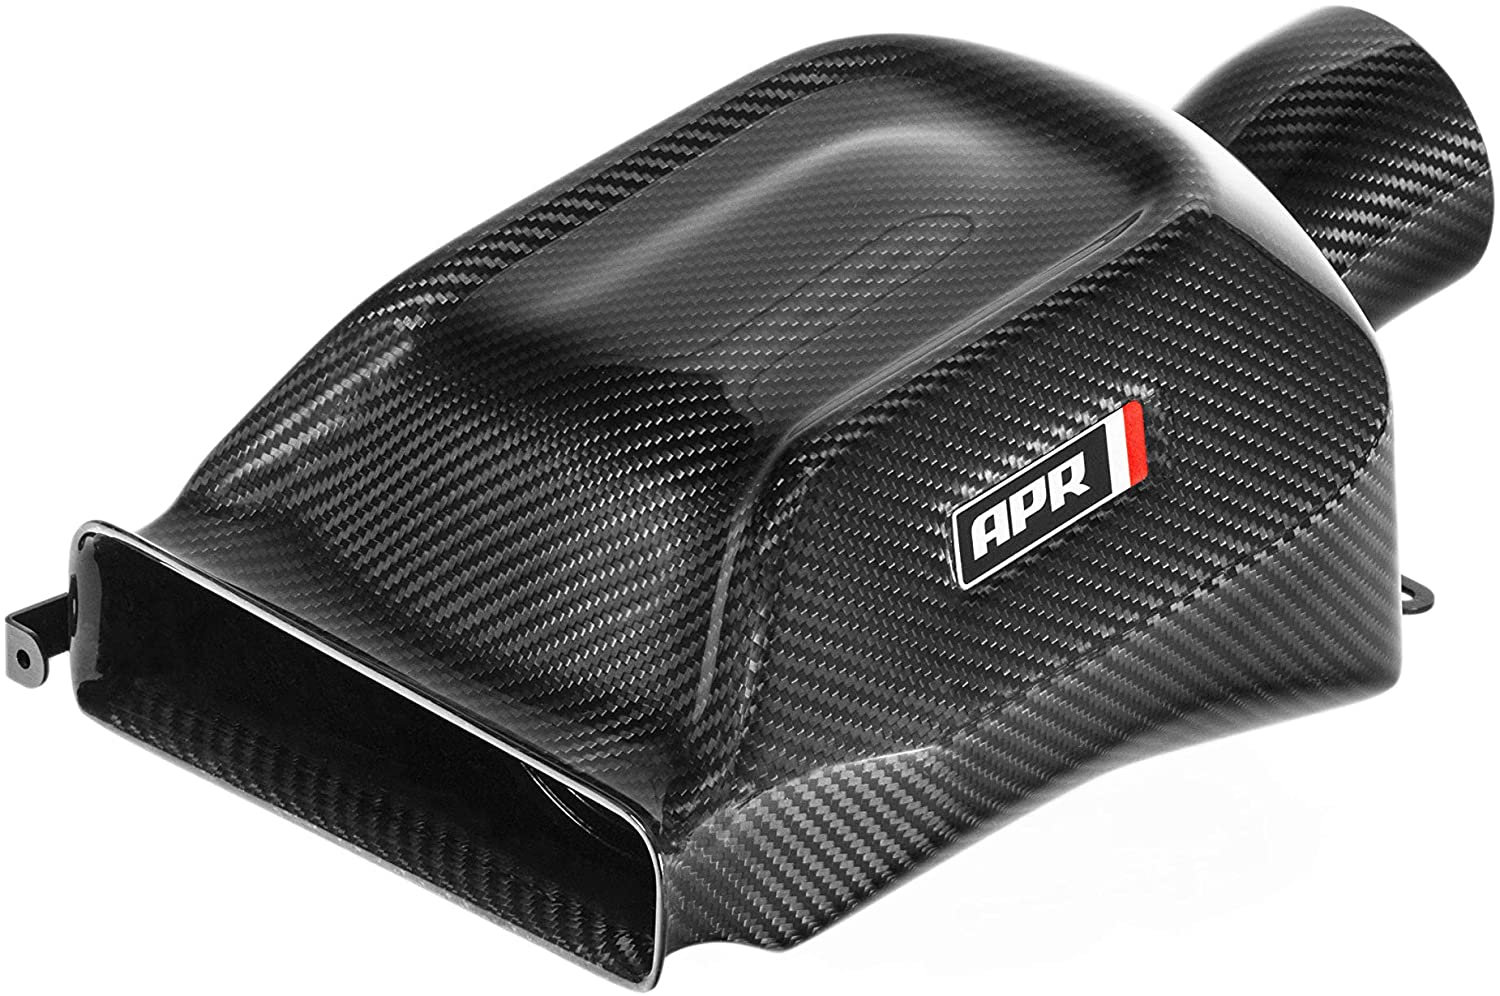 Image of Ansaugsystem APR Carbon Air Intake System für Volkswagen Scirocco 137 2.0 TSI 220ps